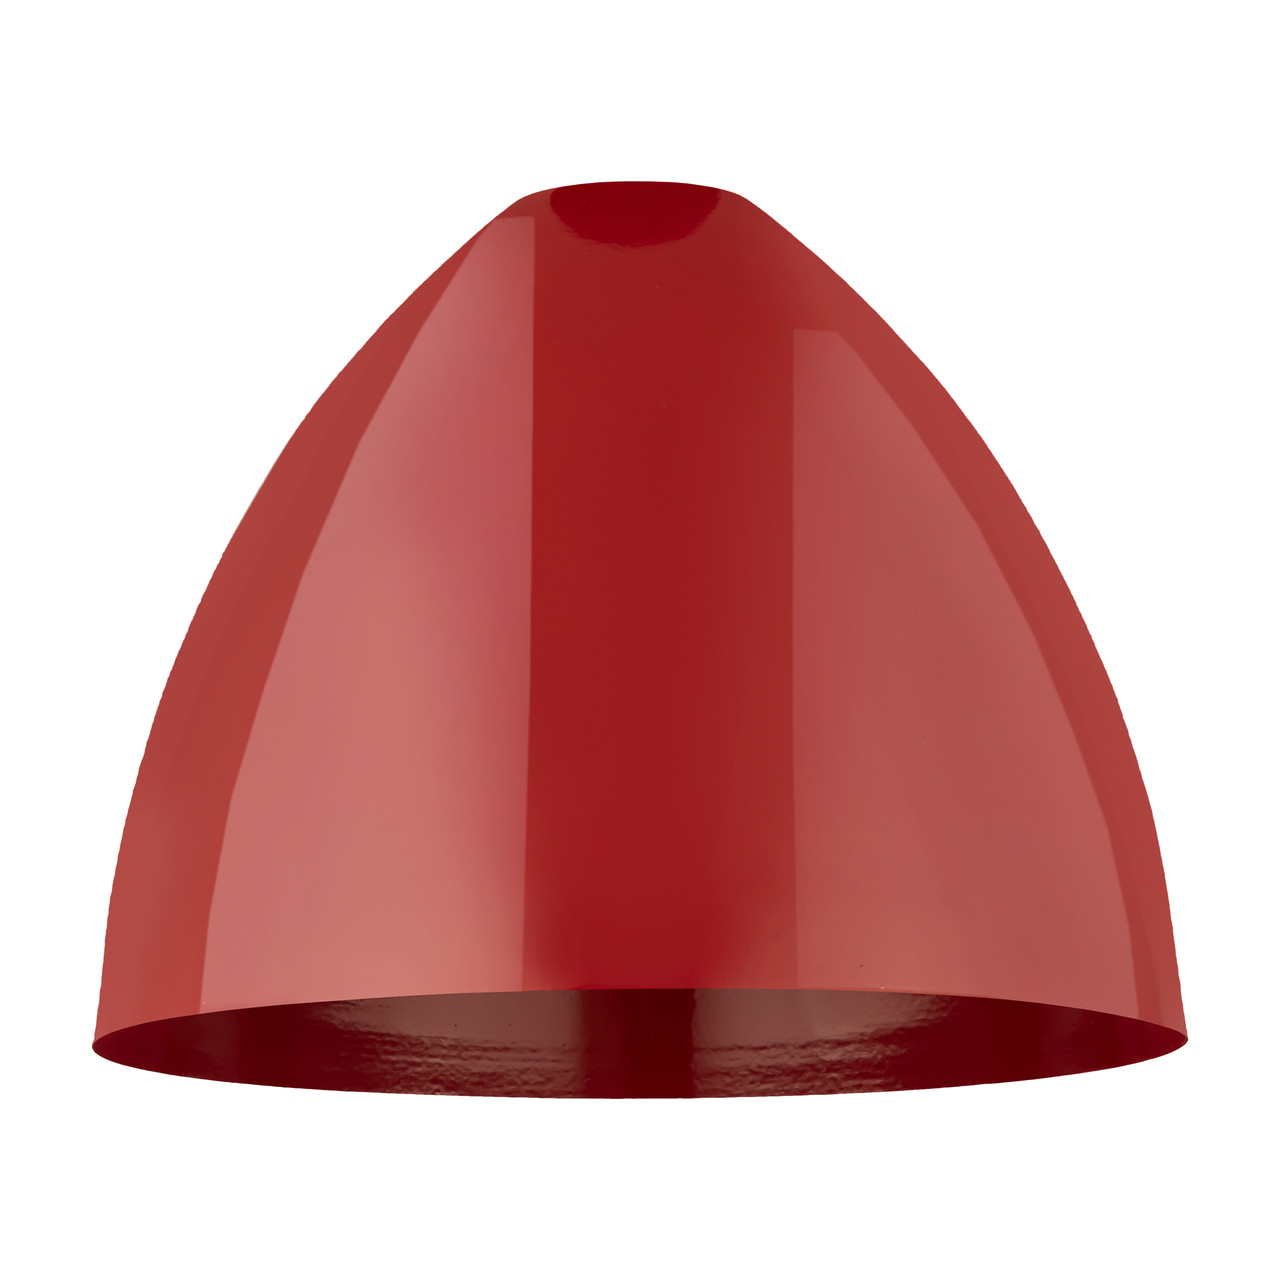 INNOVATIONS MBD-16-RD Plymouth Dome Light 16 inch Red Metal Shade